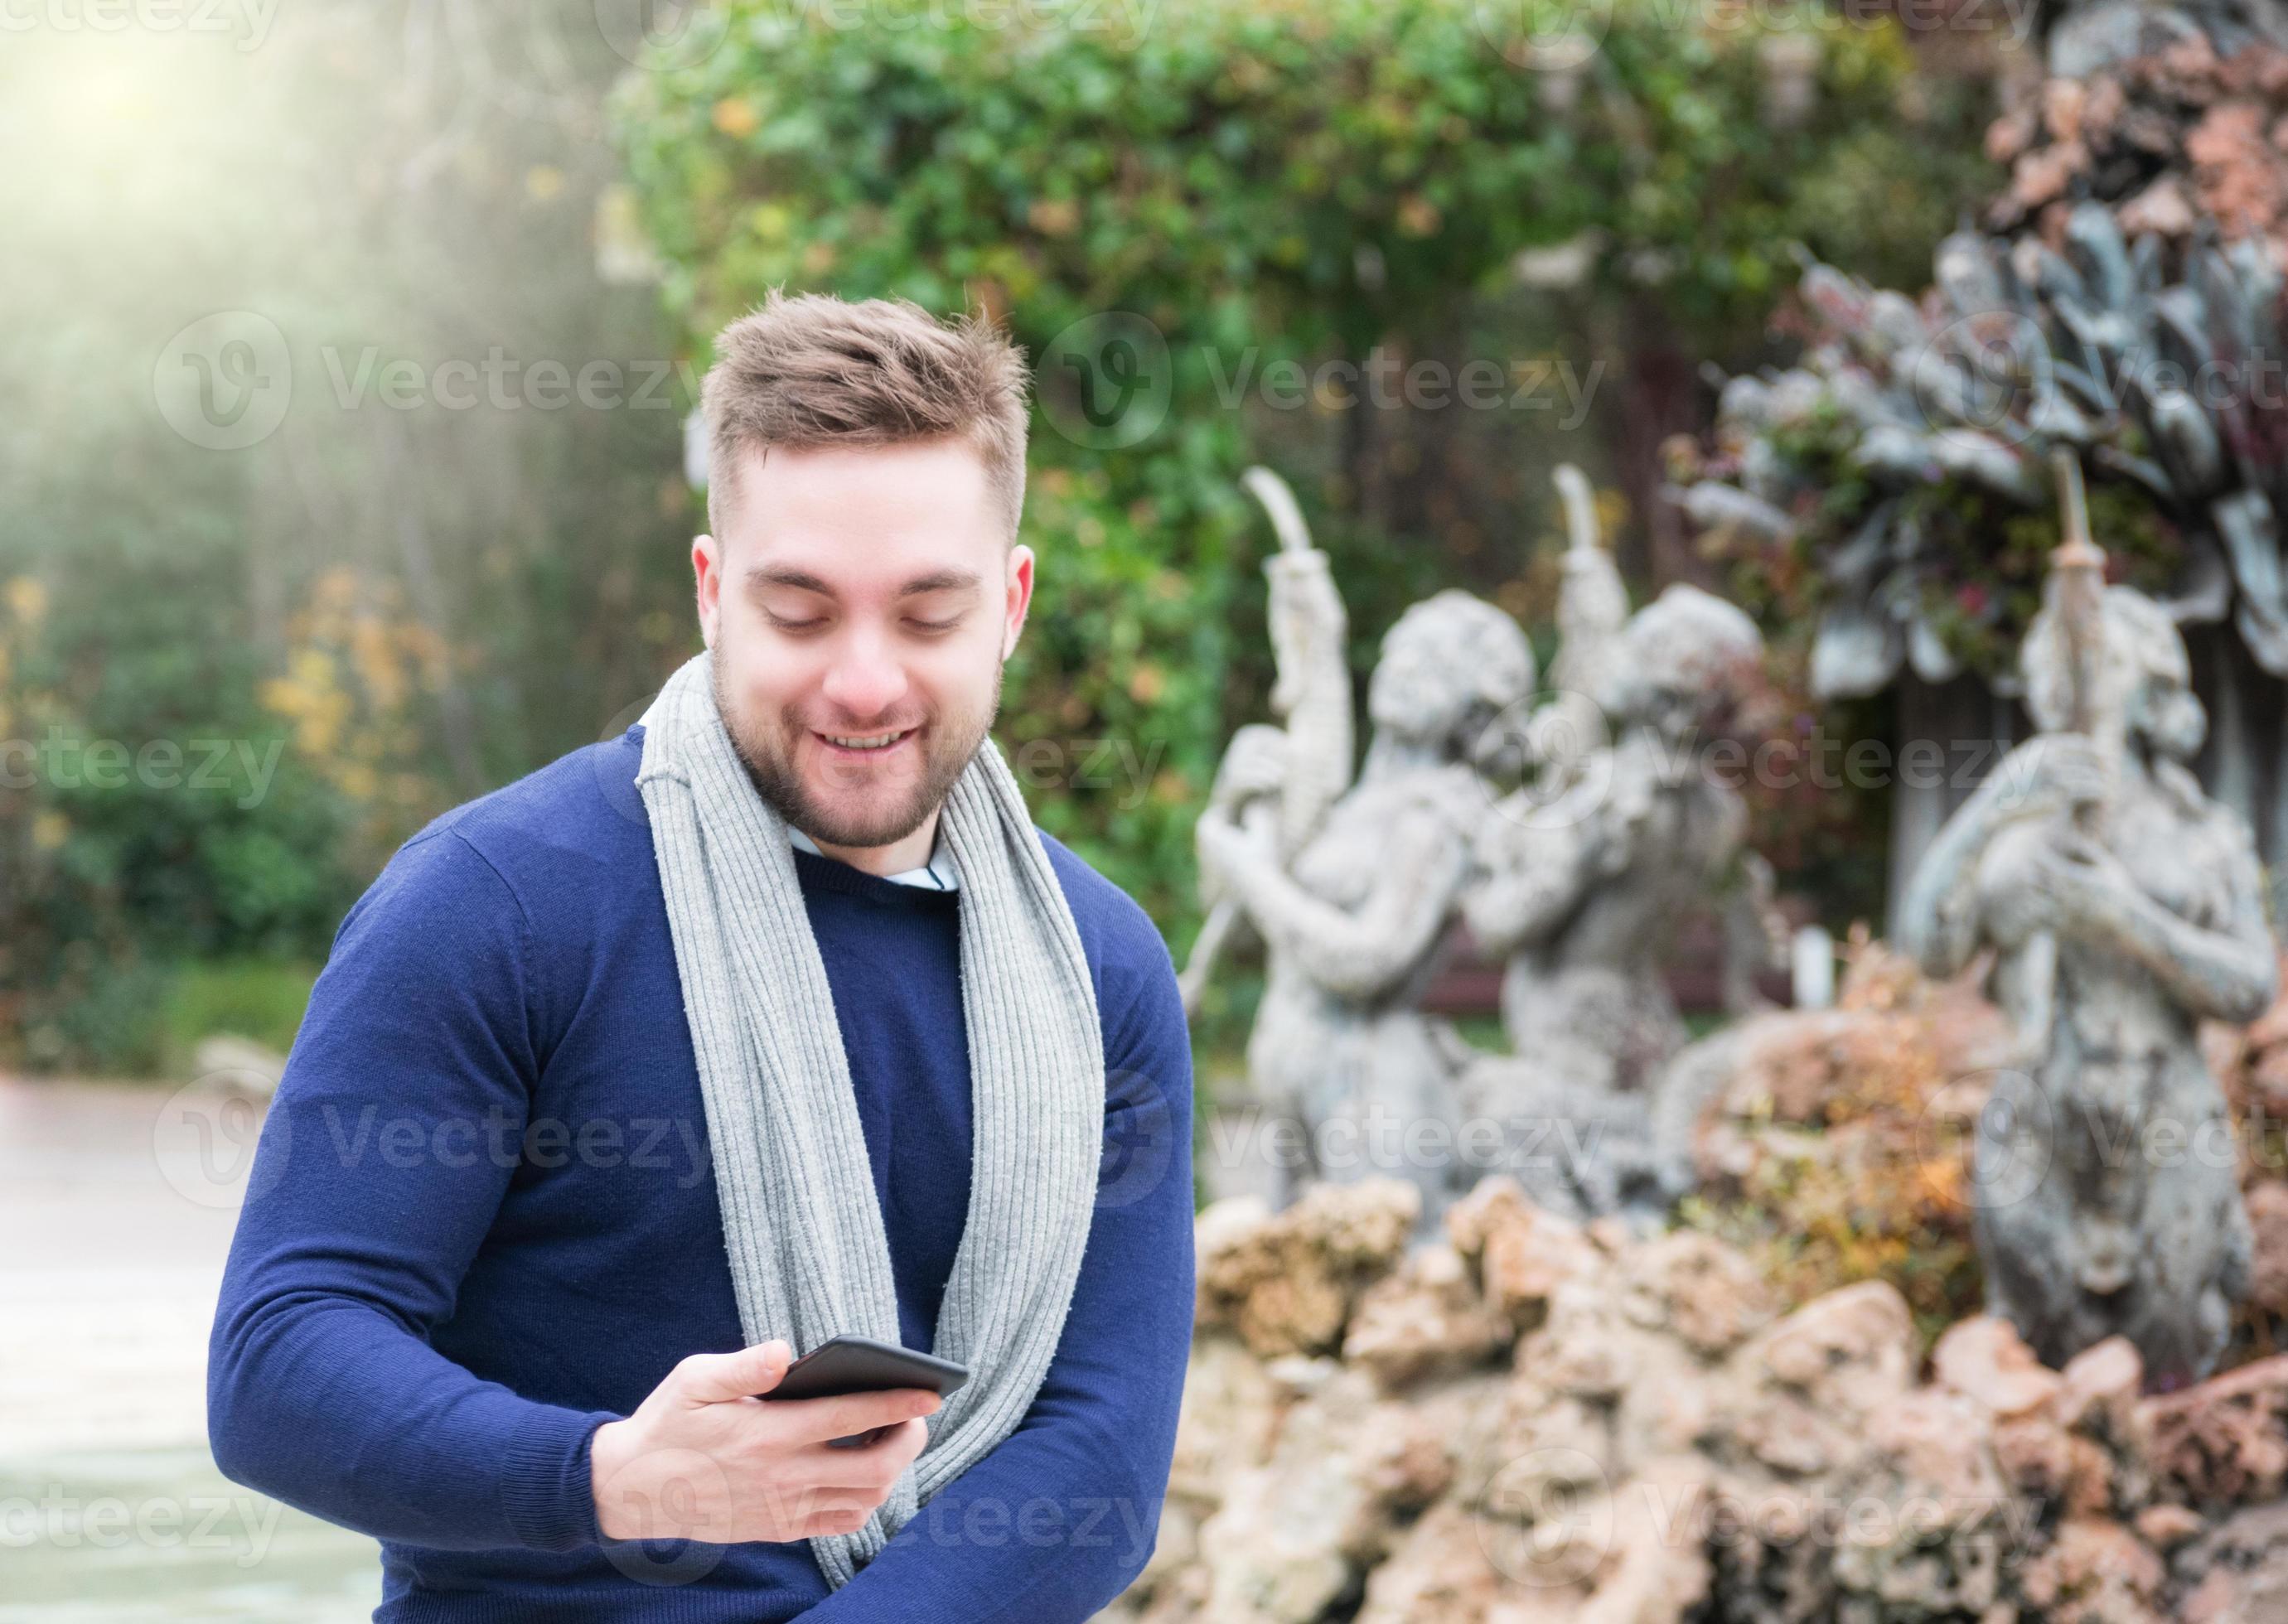 Young man smiling in a park checking his cell phone photo